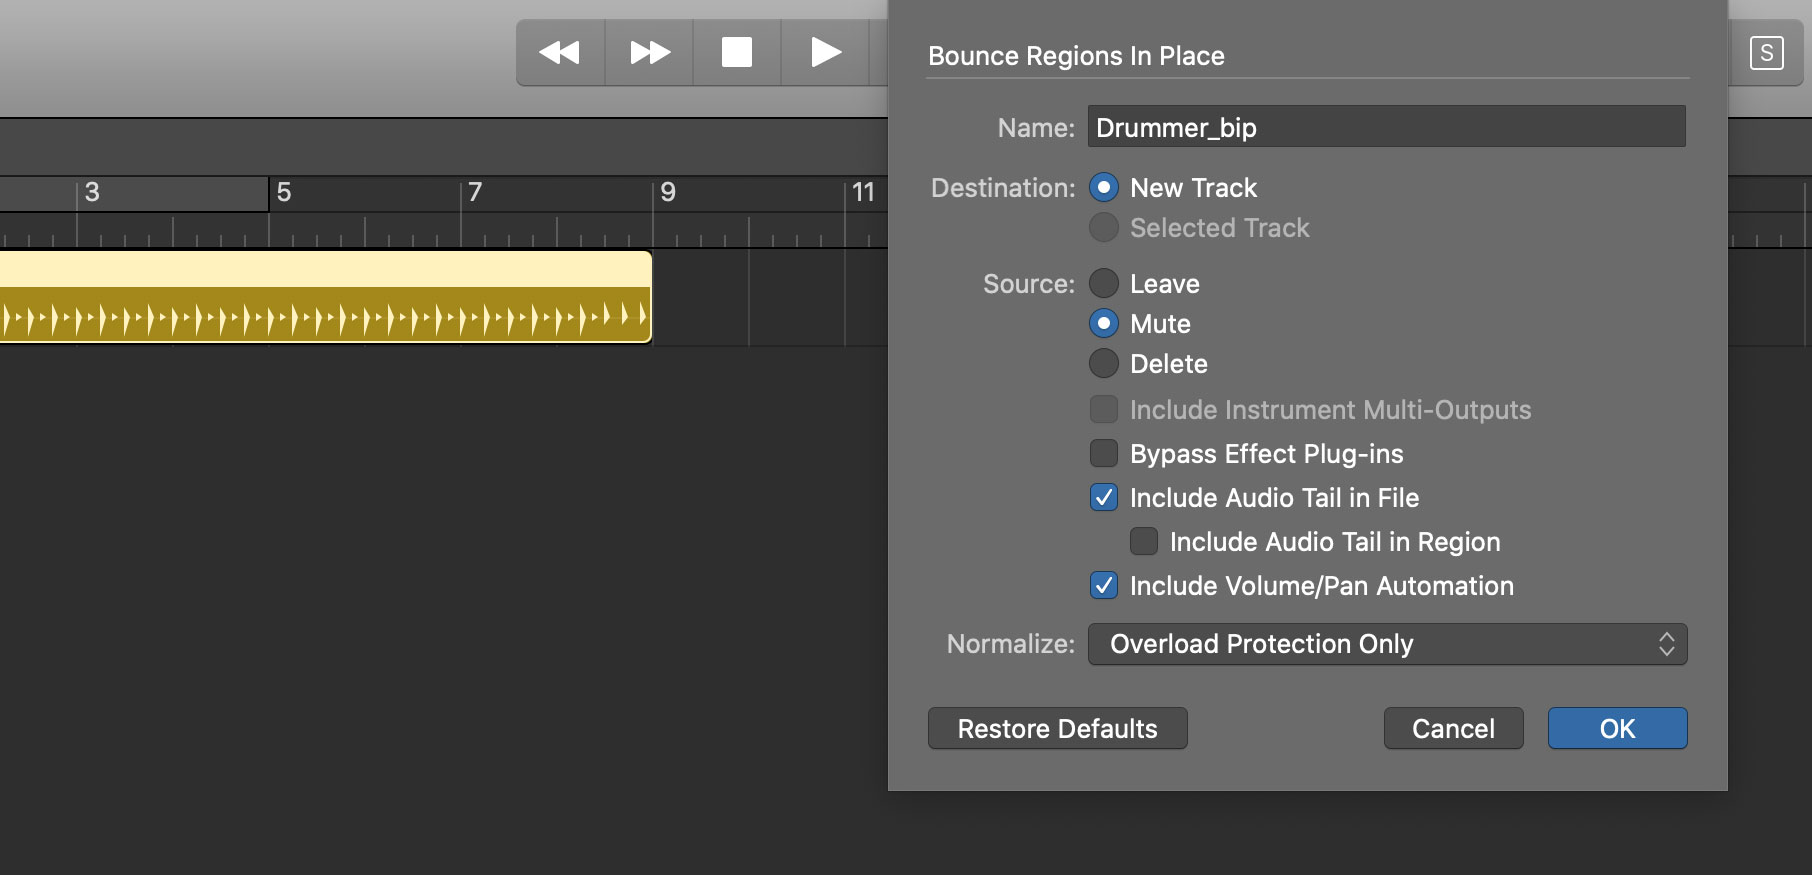 Default settings for the "bounce in place" function in Logic Pro X.